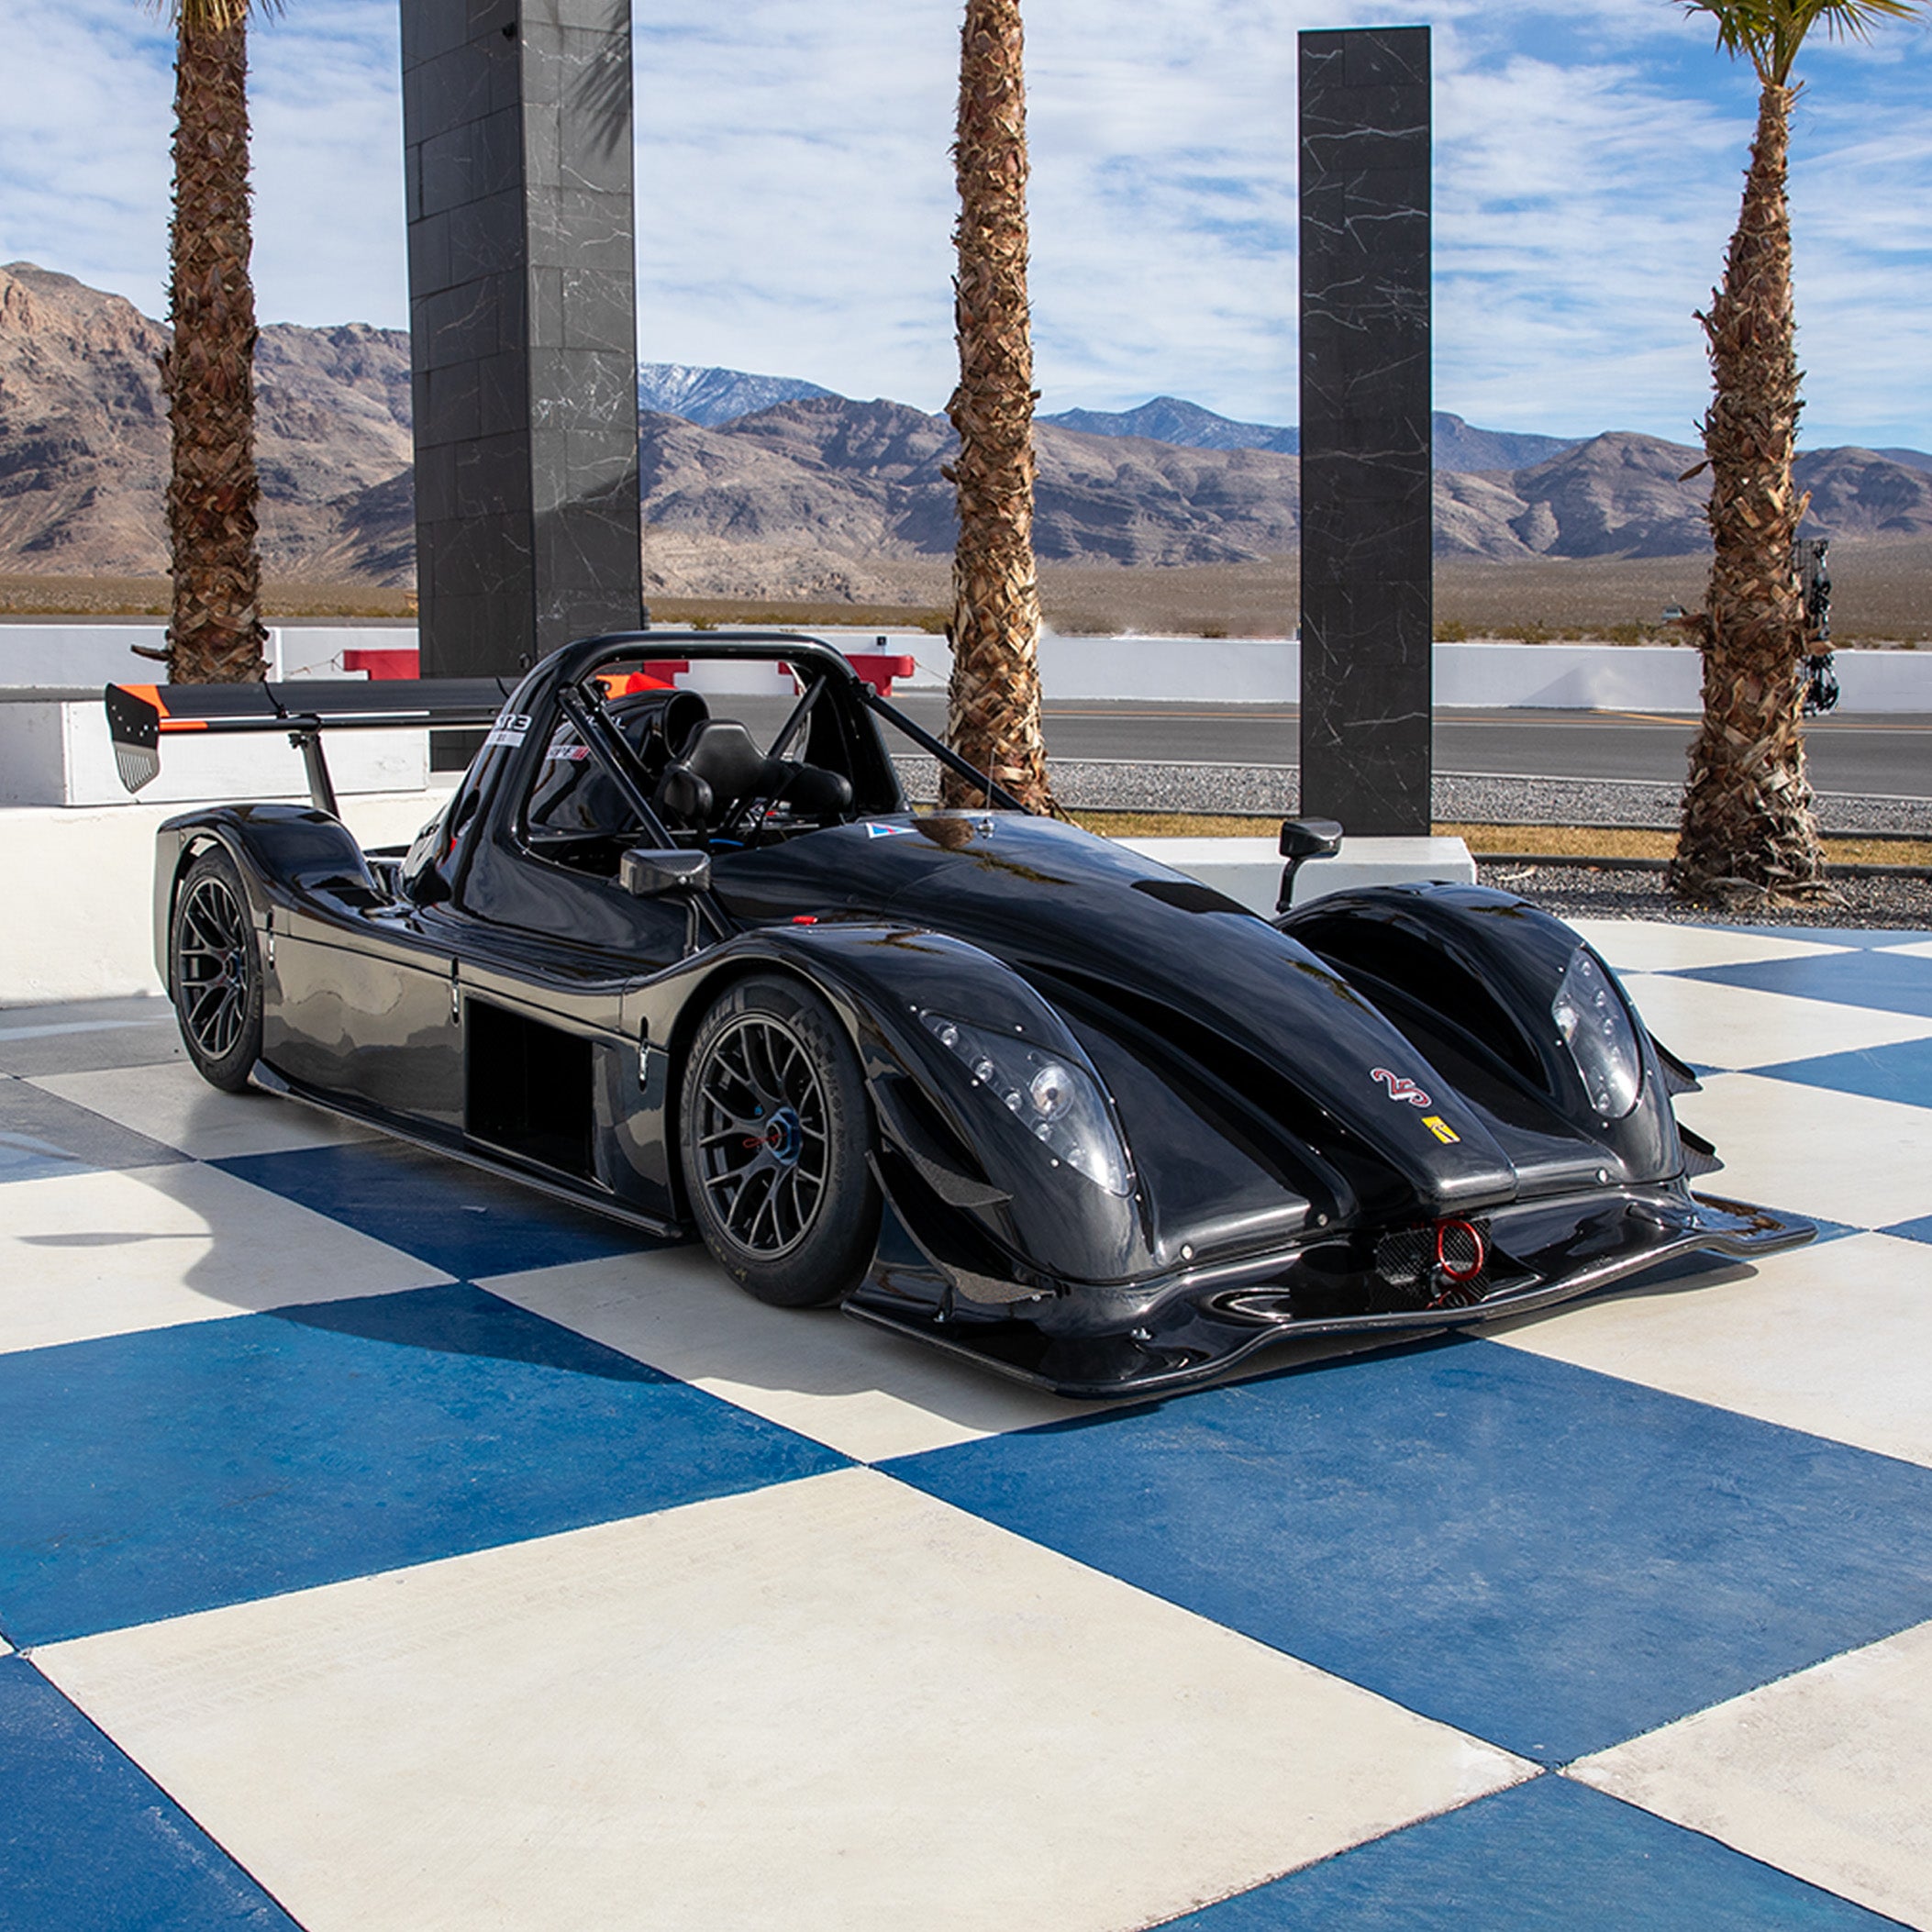 2022 Radical SR3XX with only 18.9 hours on the vehicle